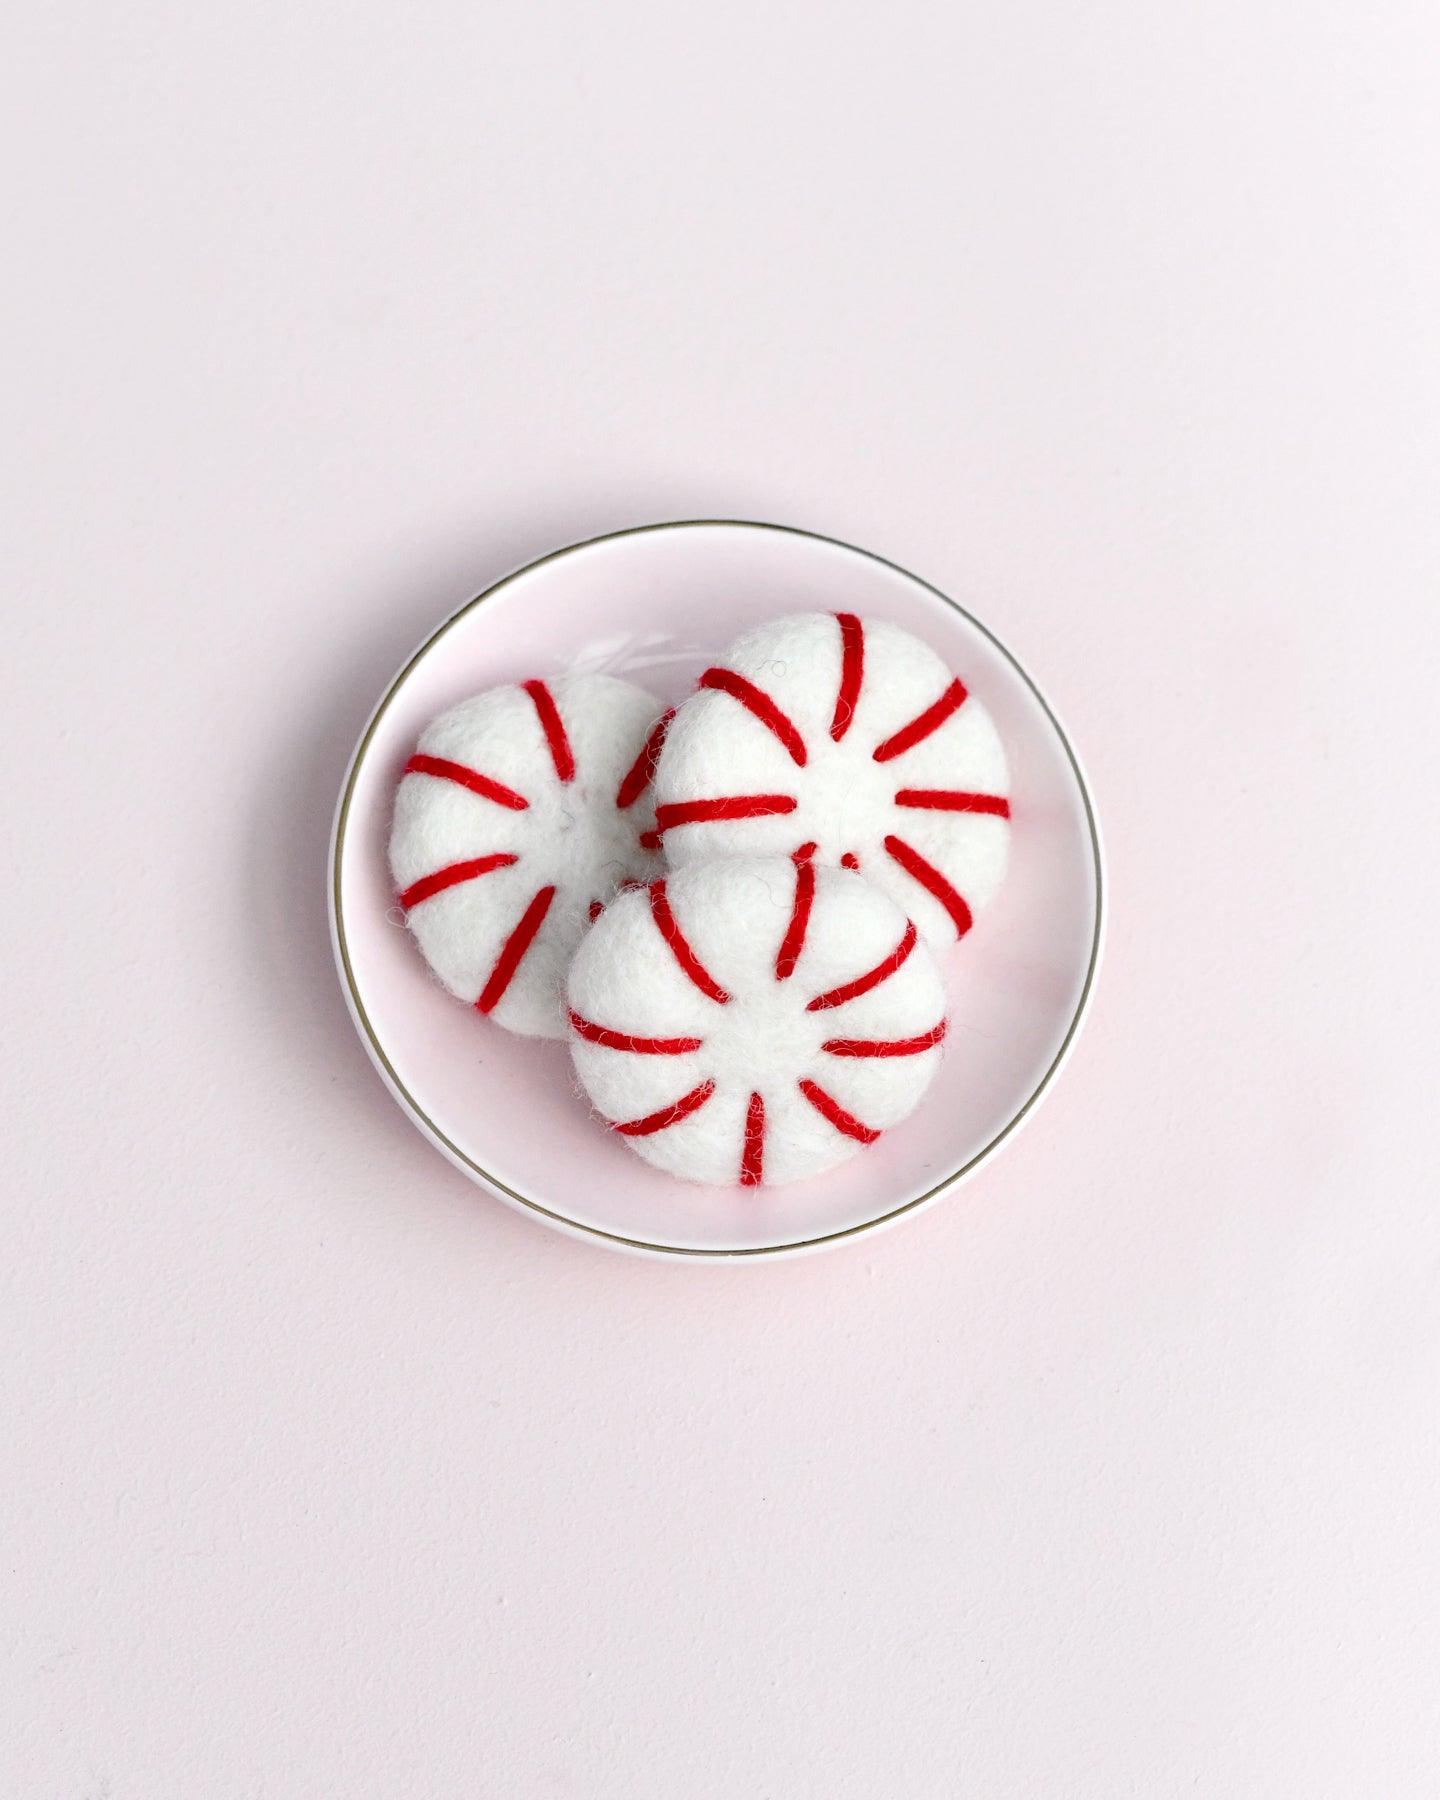 Felt Peppermint Candy Lollies (Red and White) - Set of 3 - Tara Treasures